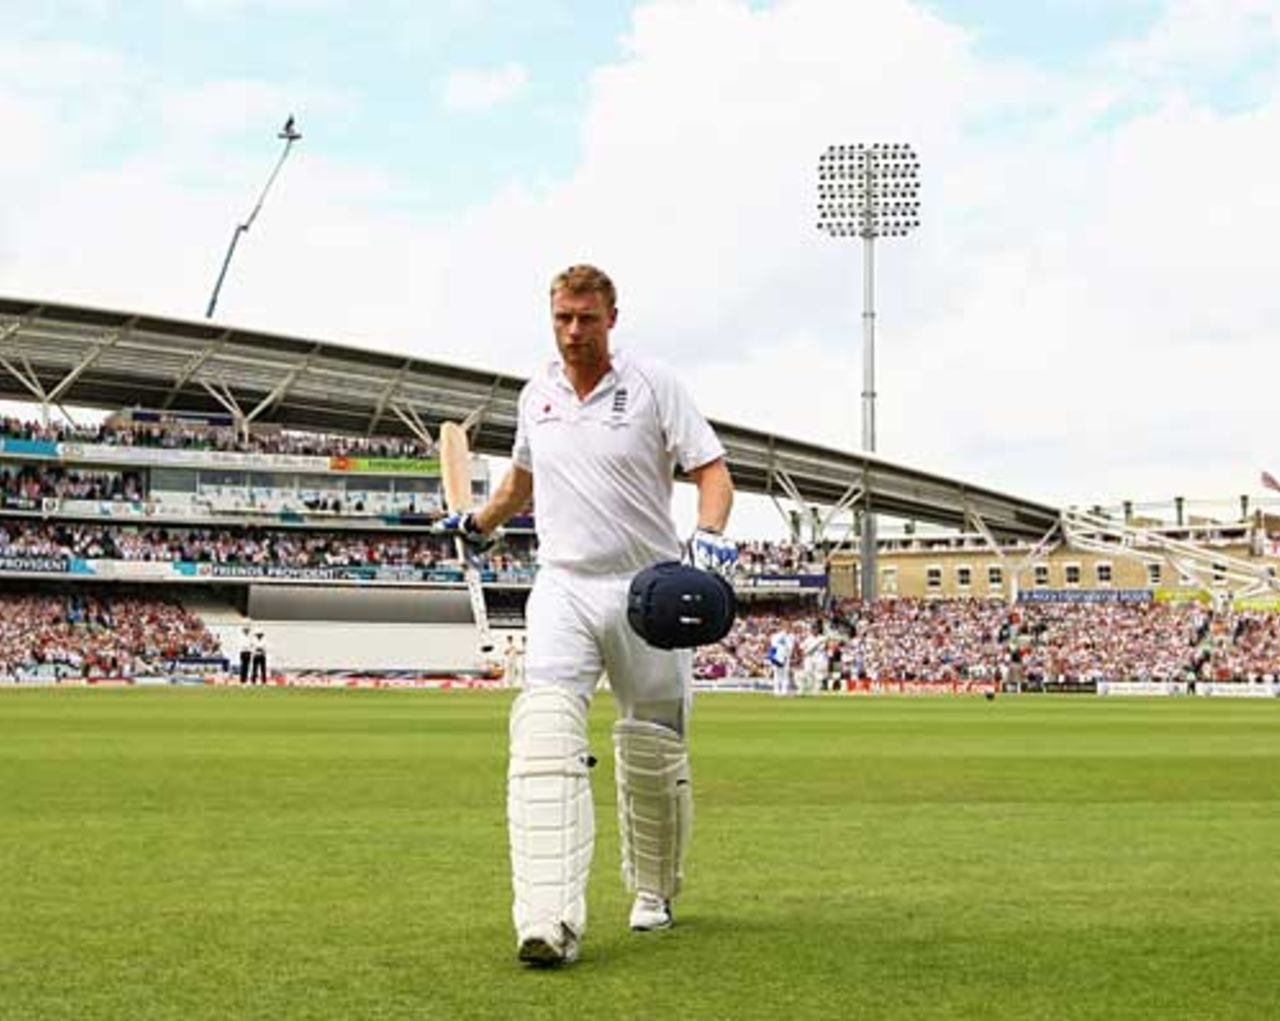 Andrew Flintoff gives the ground a quick wave as he departs, England v Australia, 5th Test, The Oval, 3rd day, August 22, 2009